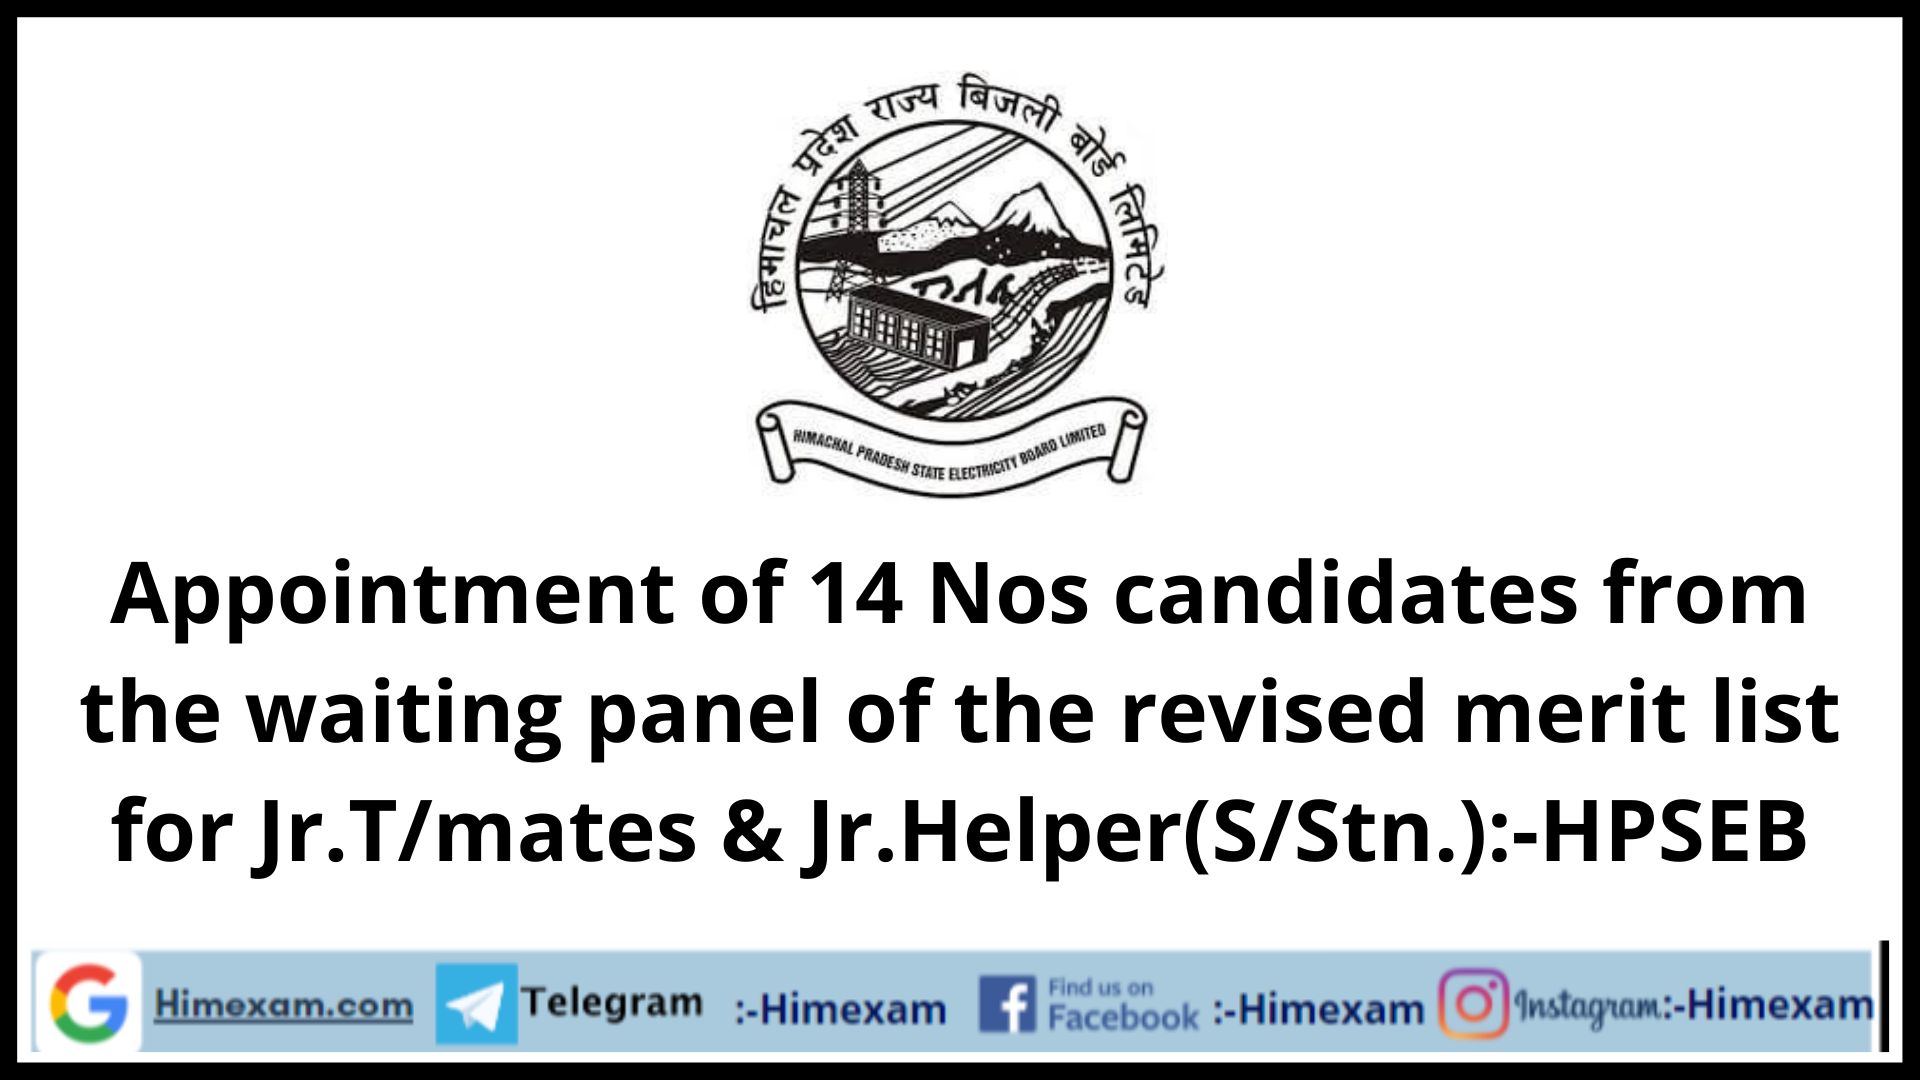 Appointment of 14 Nos candidates from the waiting panel of the revised merit list for Jr.T/mates & Jr.Helper(S/Stn.):-HPSEB